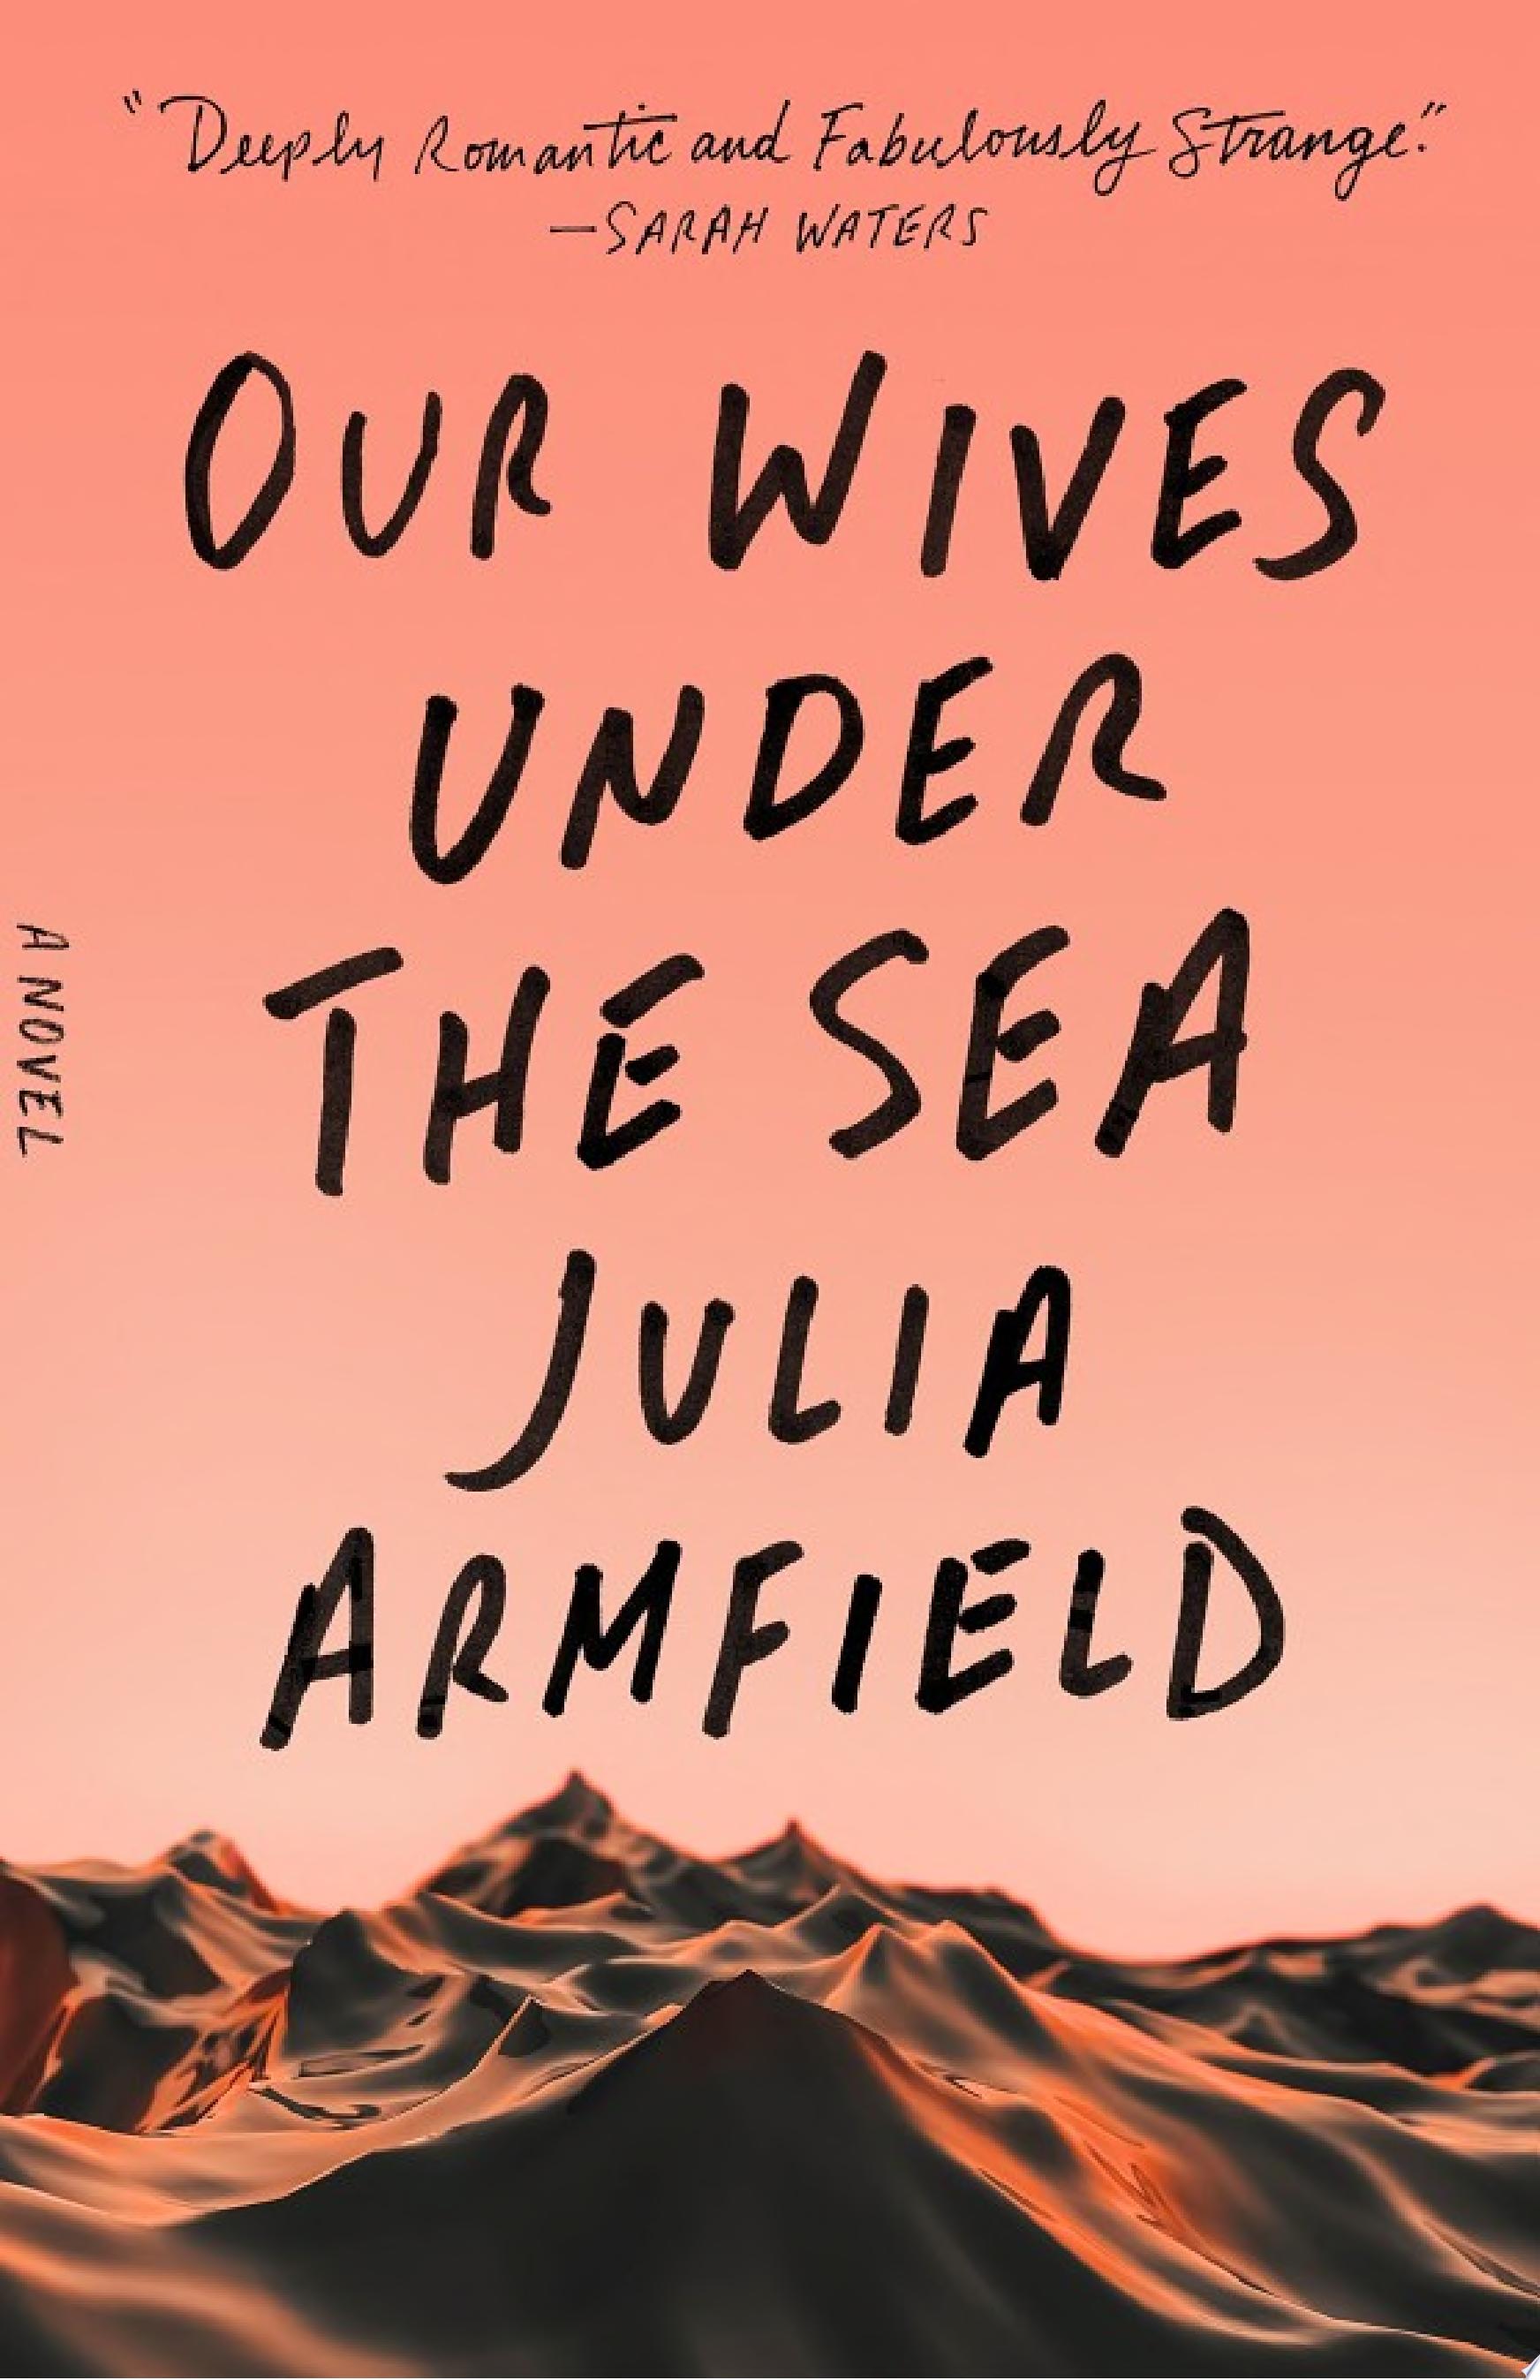 Image for "Our Wives Under the Sea"